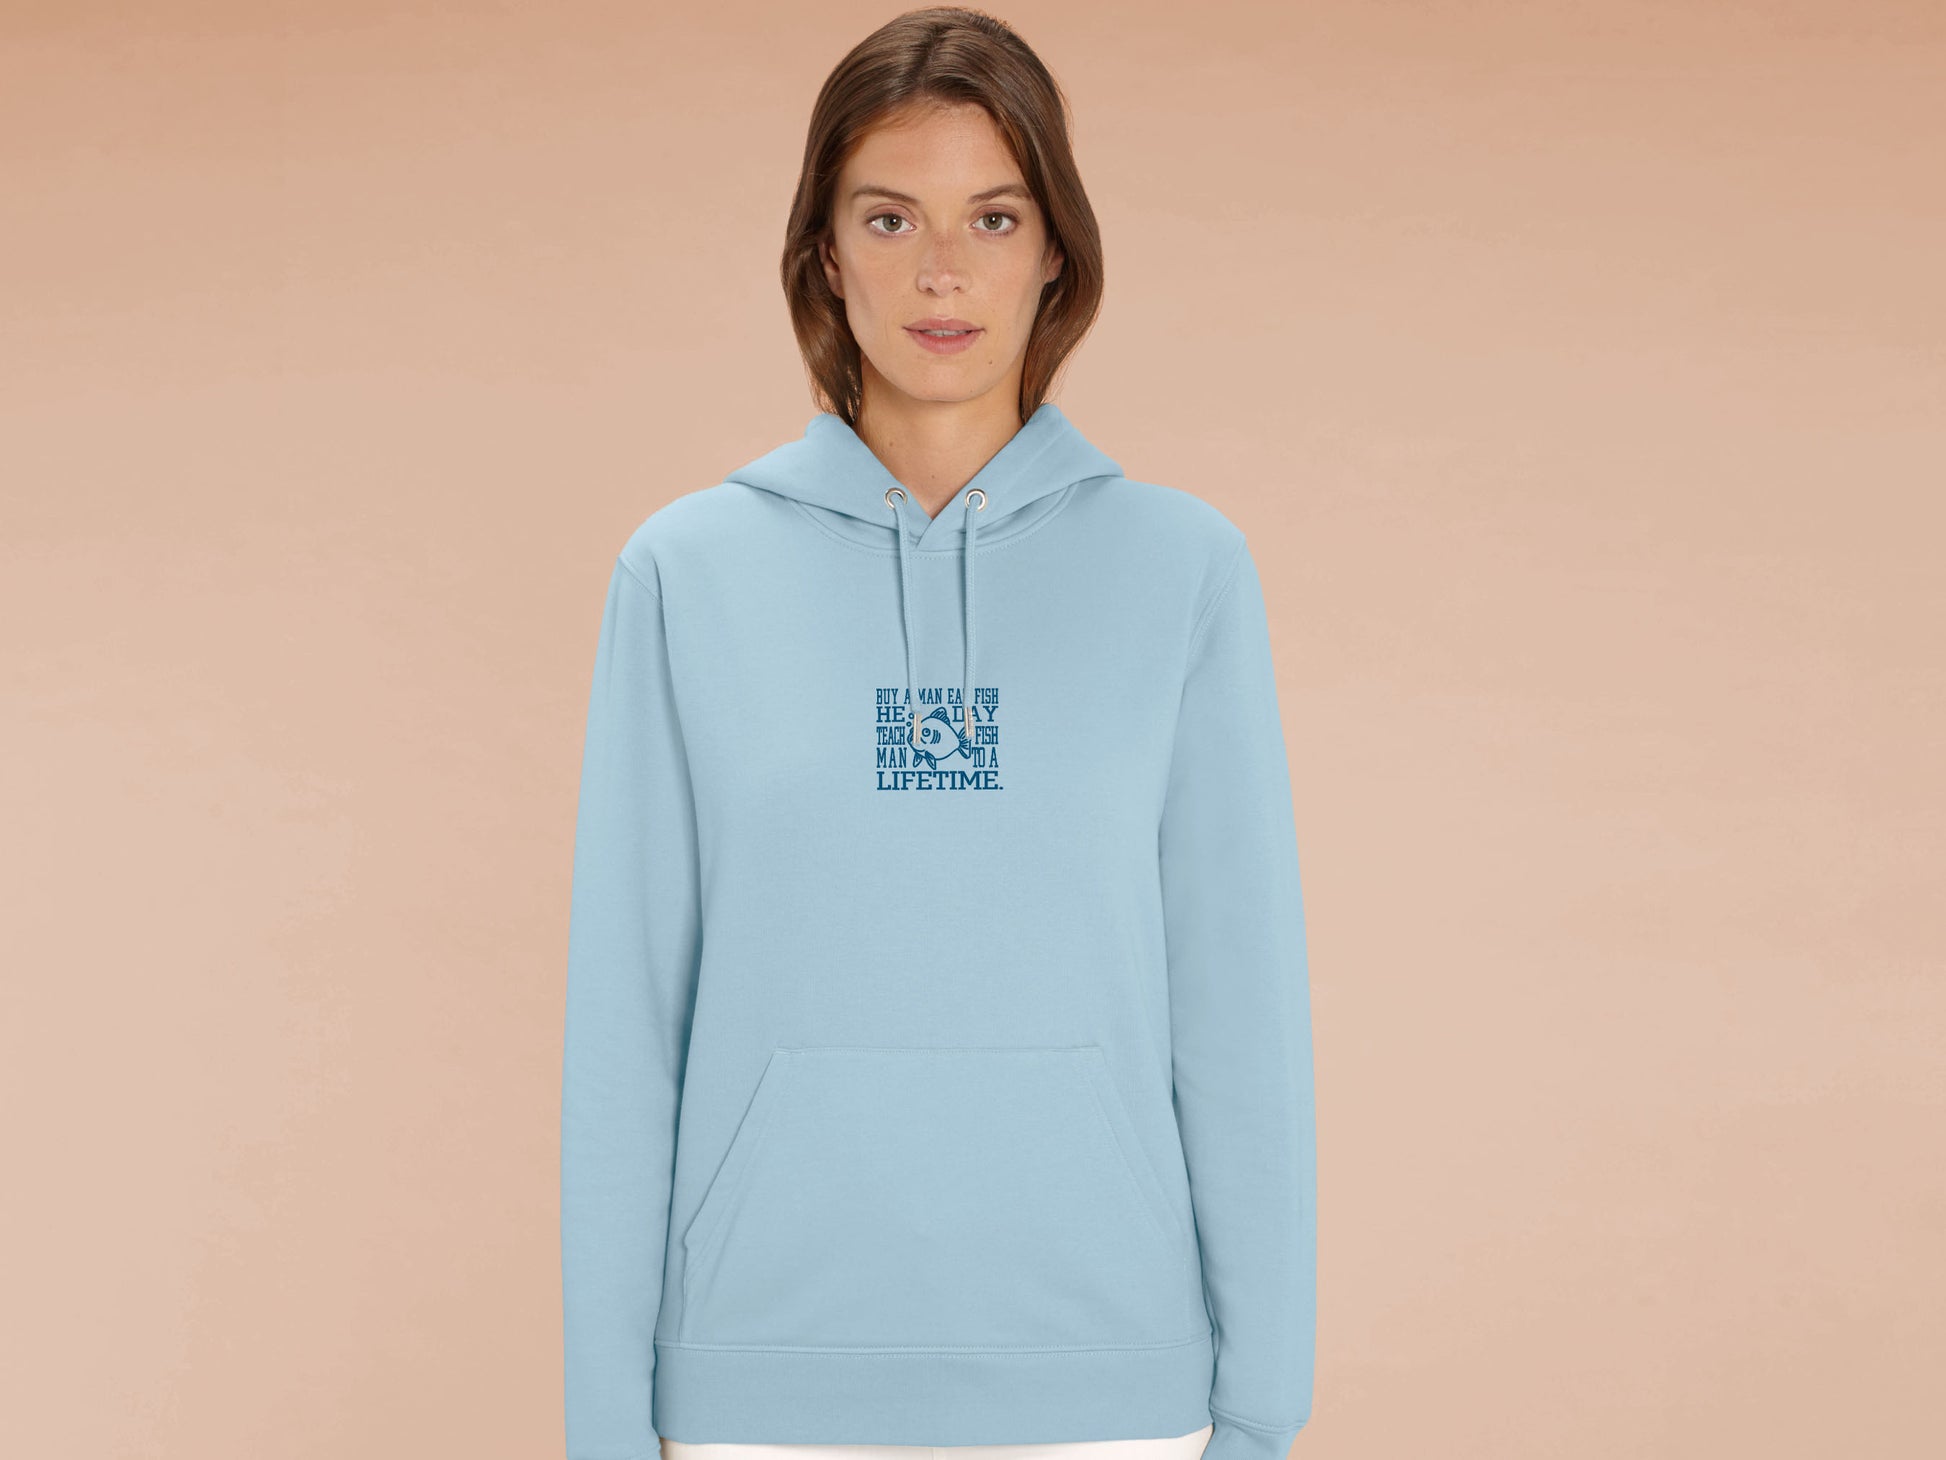 A woman wearing a blue long sleeved fleece hoodie with an embroidered blue design of a cartoon funny fish with the meme text Buy a man eat a fish he day teach fish man to a lifetime.